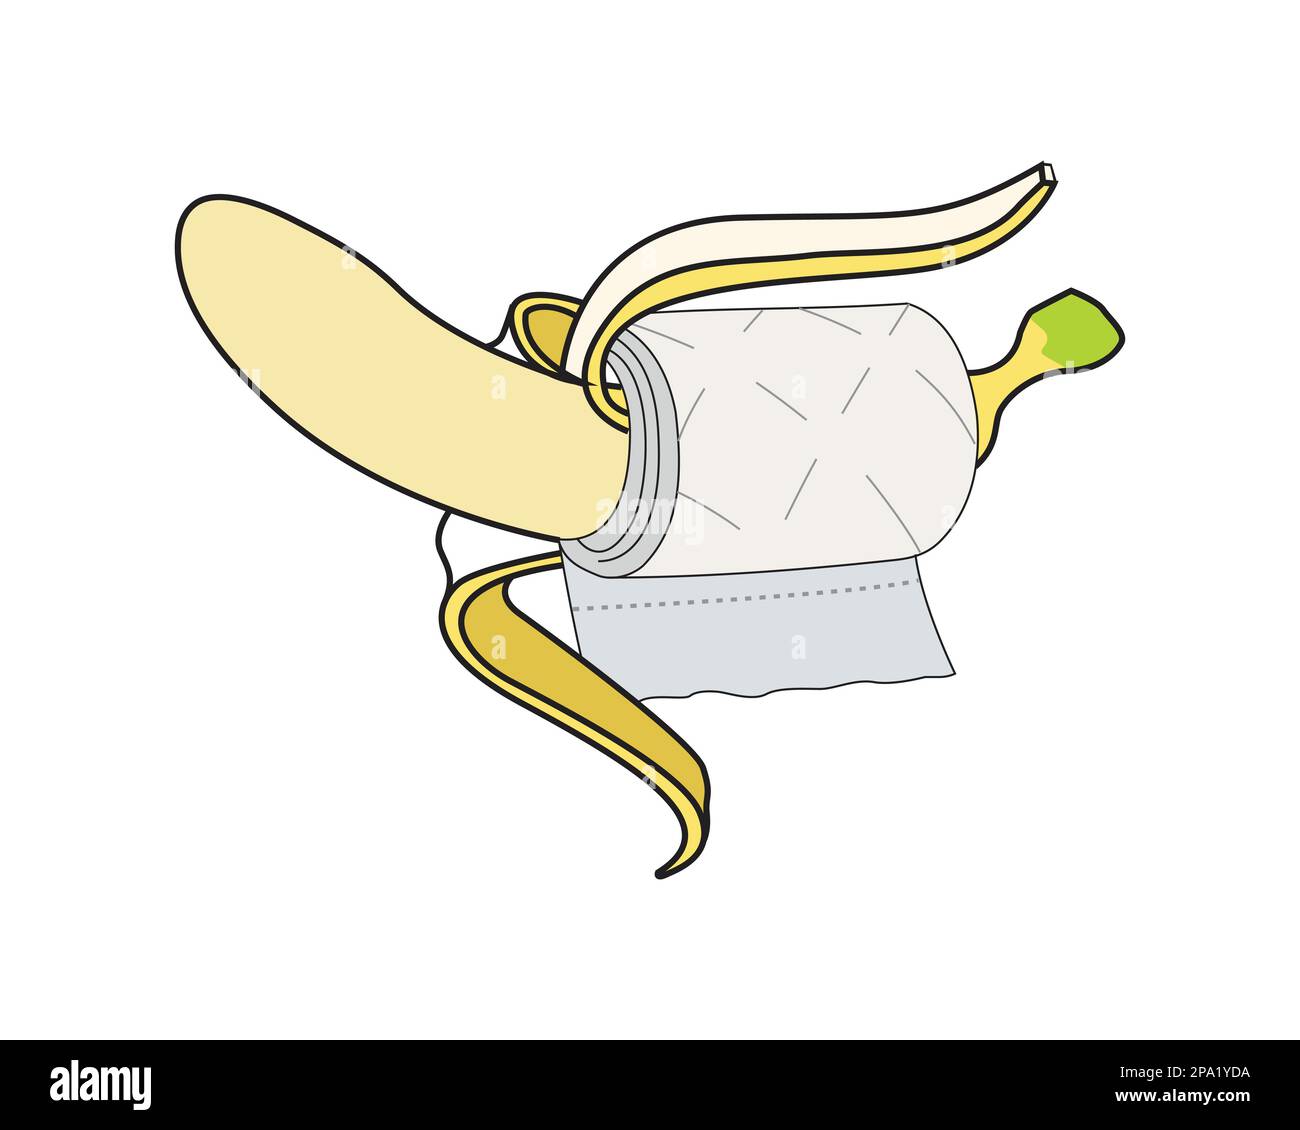 Banana combined with Tissue Illustration visualized with Simple Illustration Stock Vector